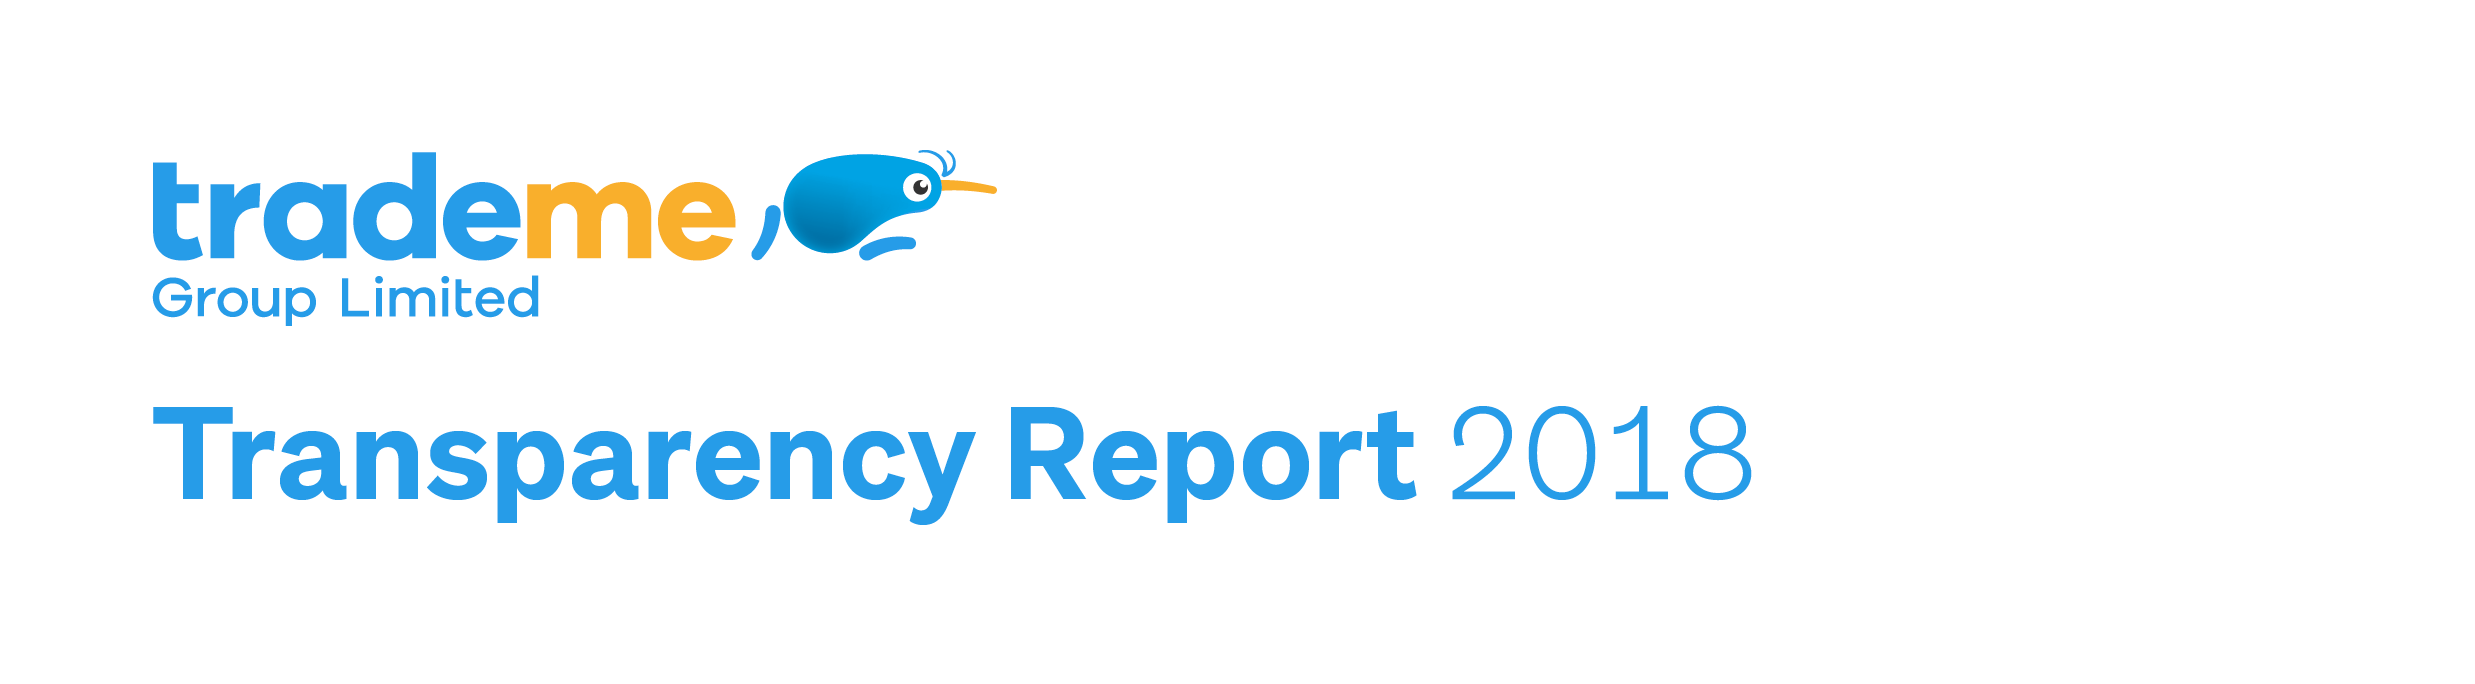 Trade Me Transparency Report 2018